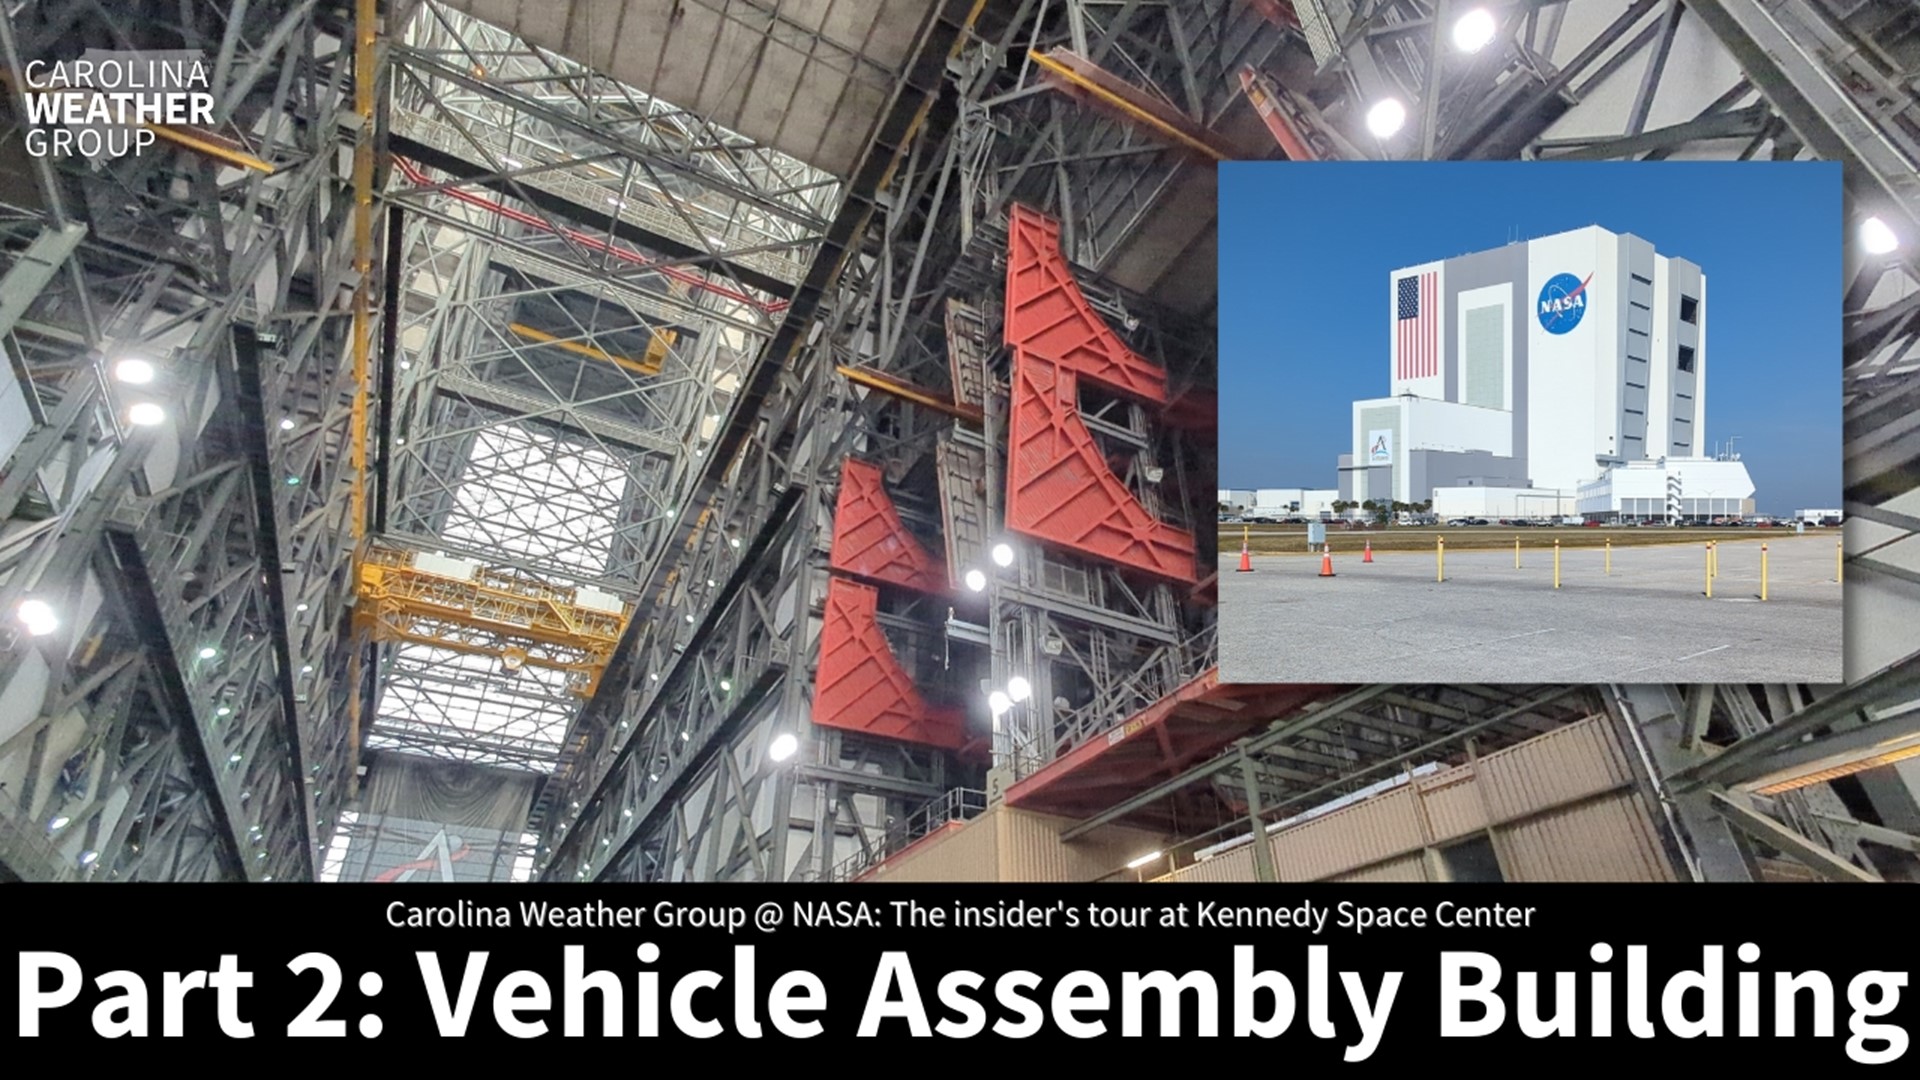 The Vehicle Assembly Building, also known as the VAB, is the place where rockets are constructed for launch at Kennedy Space Center.